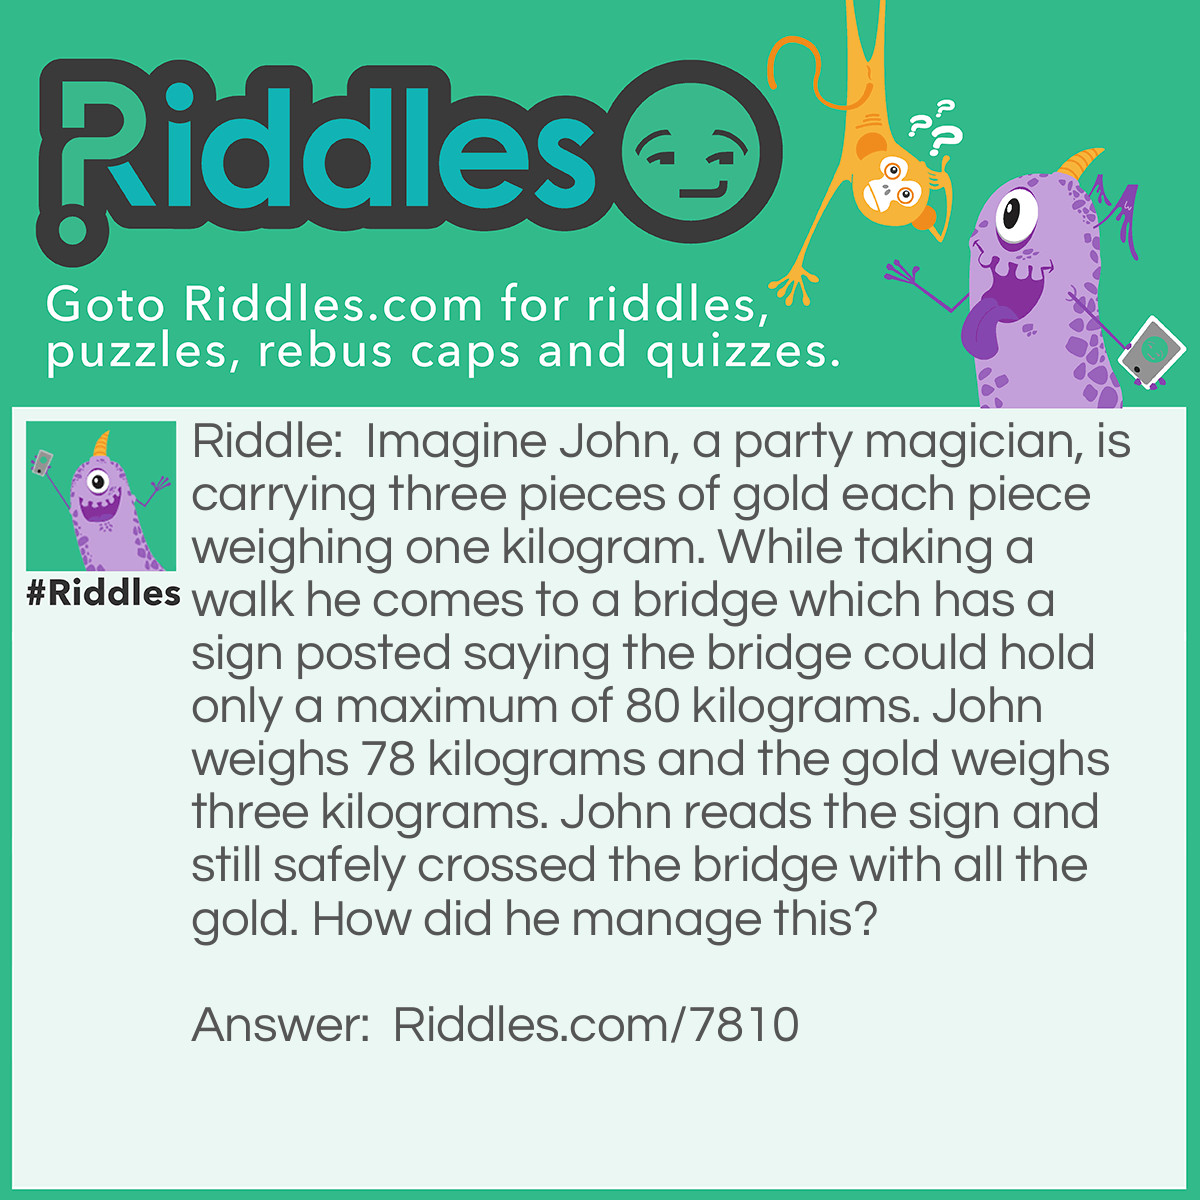 Riddle: Imagine John, a party magician, is carrying three pieces of gold each piece weighing one kilogram. While taking a walk he comes to a bridge which has a sign posted saying the bridge could hold only a maximum of 80 kilograms. John weighs 78 kilograms and the gold weighs three kilograms. John reads the sign and still safely crossed the bridge with all the gold. How did he manage this? Answer: John is a juggler. When he came to the bridge he juggled the gold, always keeping one peice in the air.